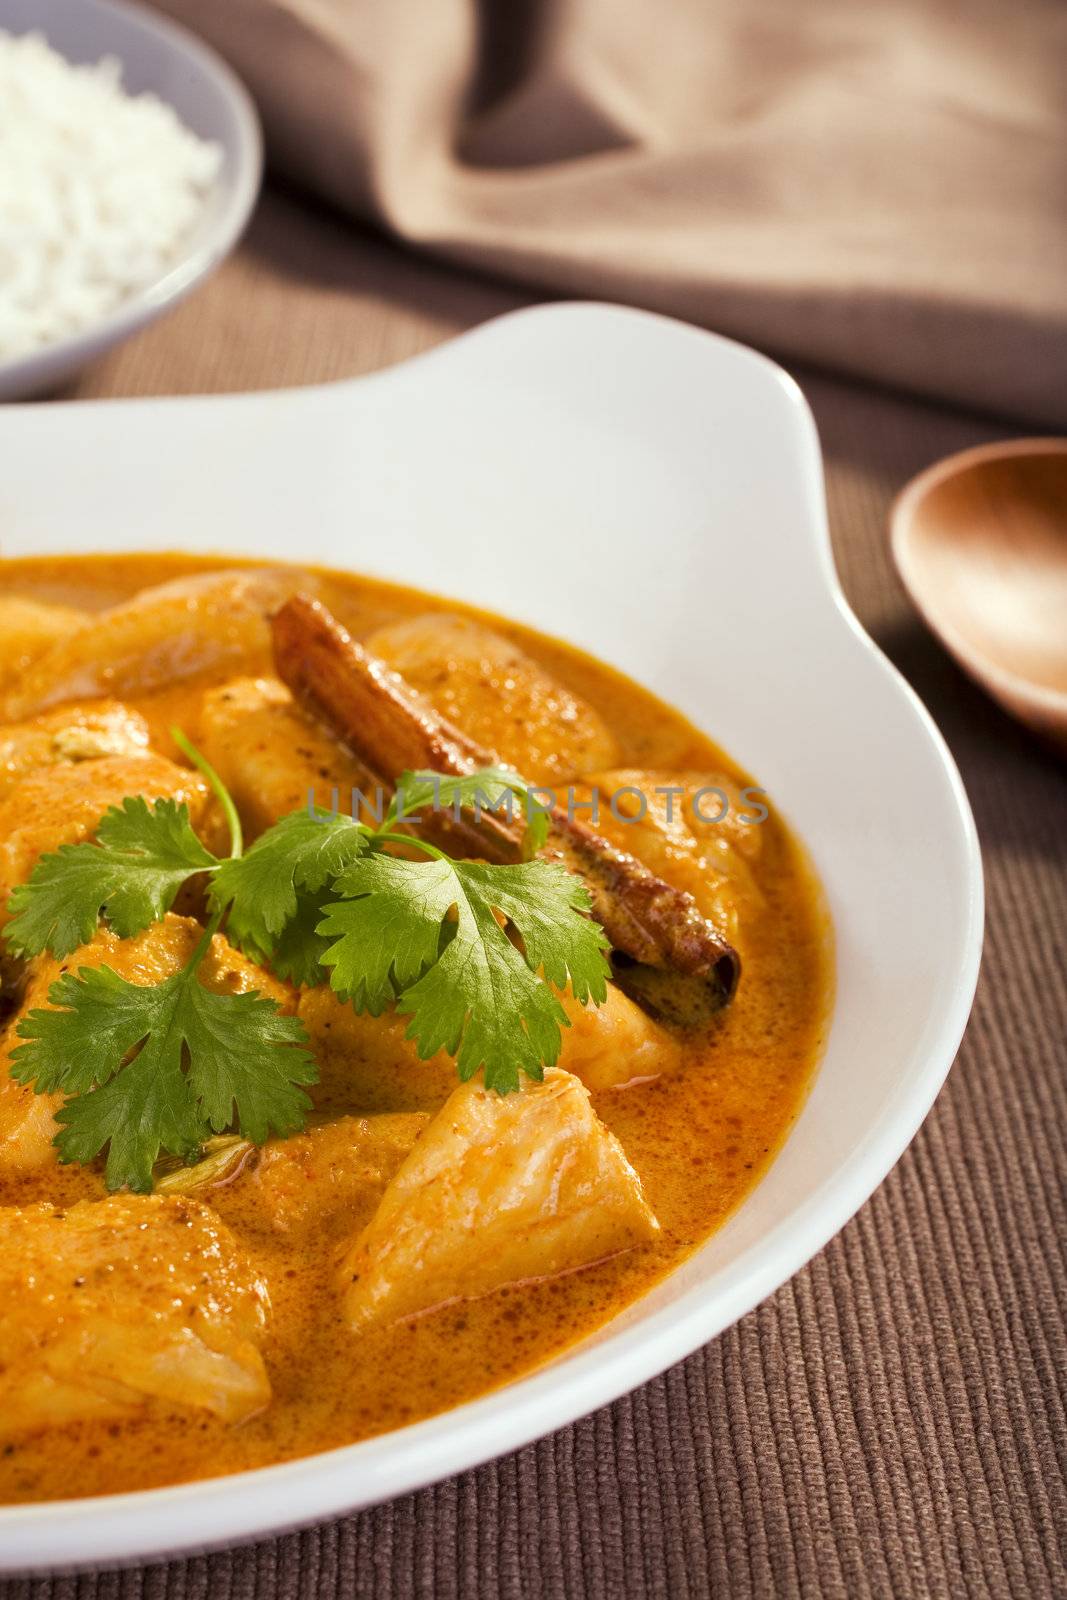 Rich and luxurious, butter chicken is mild and creamy and is enriched with cream and yoghurt. Here served with basmati rice. Not for the diet conscious, but a special treat is good for you too. Garnished with coriander, cinnamon and cardamom.